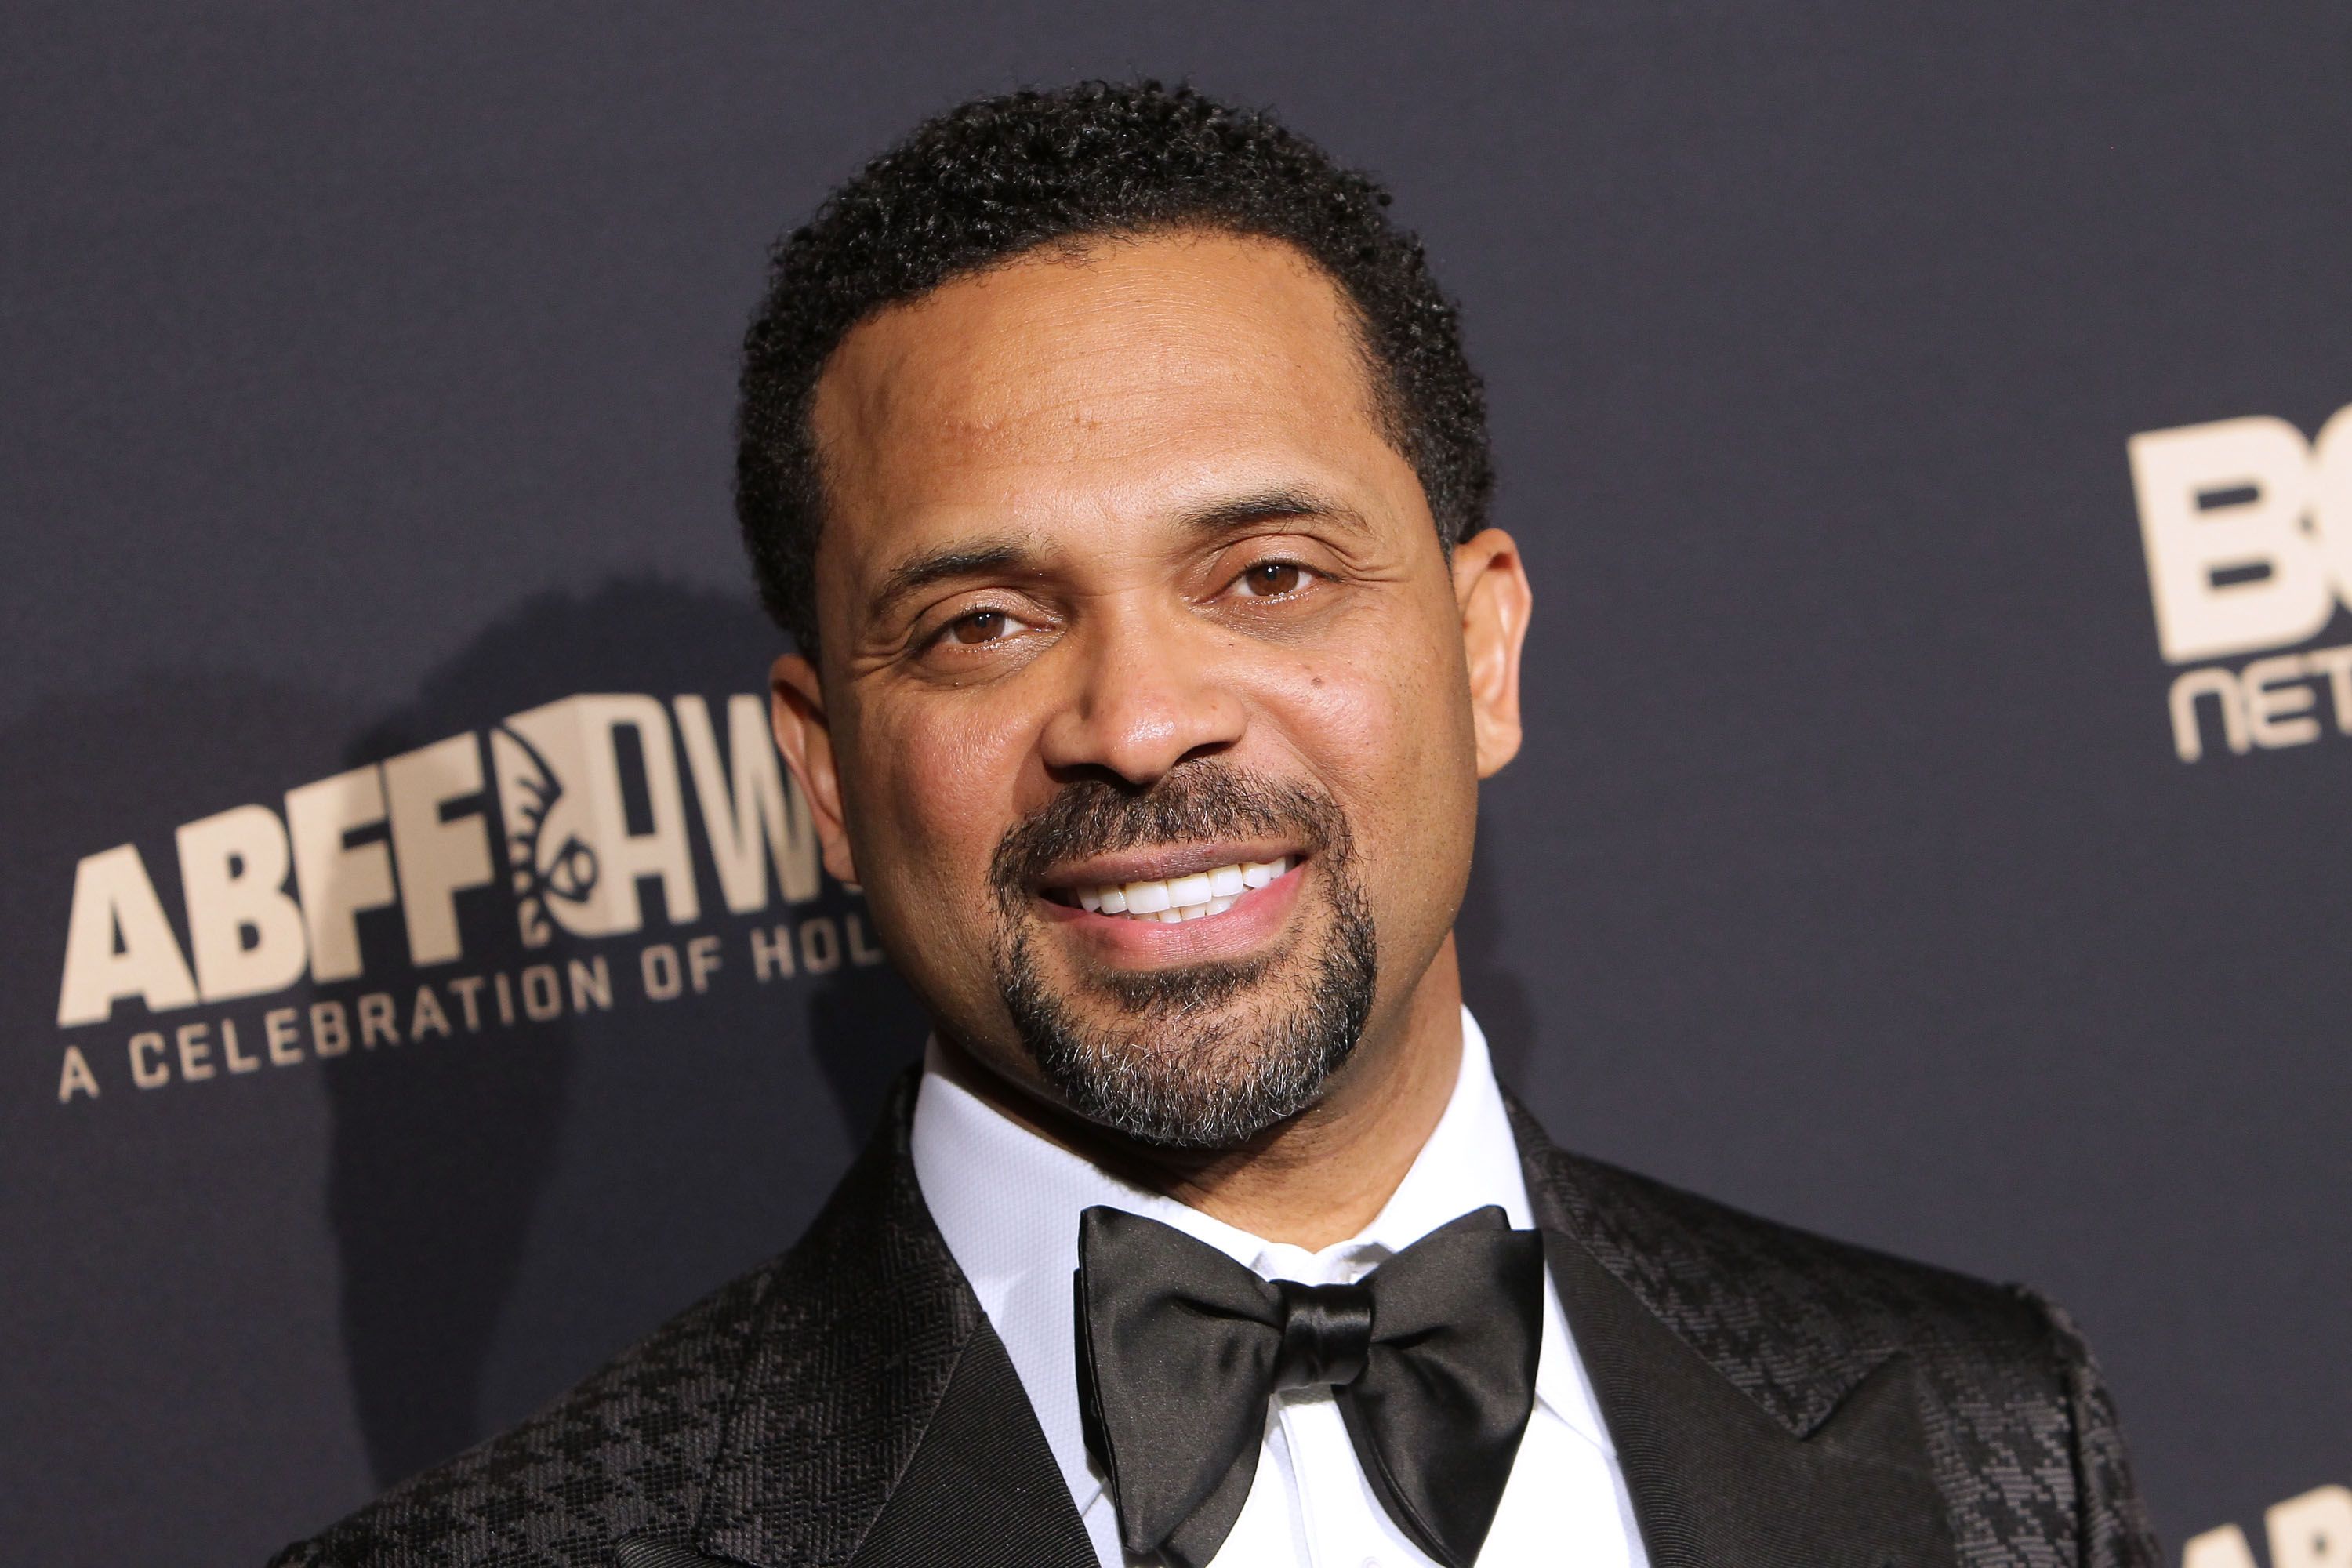 Mike Epps attends the 2016 American Black Film Festival Awards Gala on February 21, 2016 in Beverly Hills, California,  │Photo: WireImage/Leon Bennett